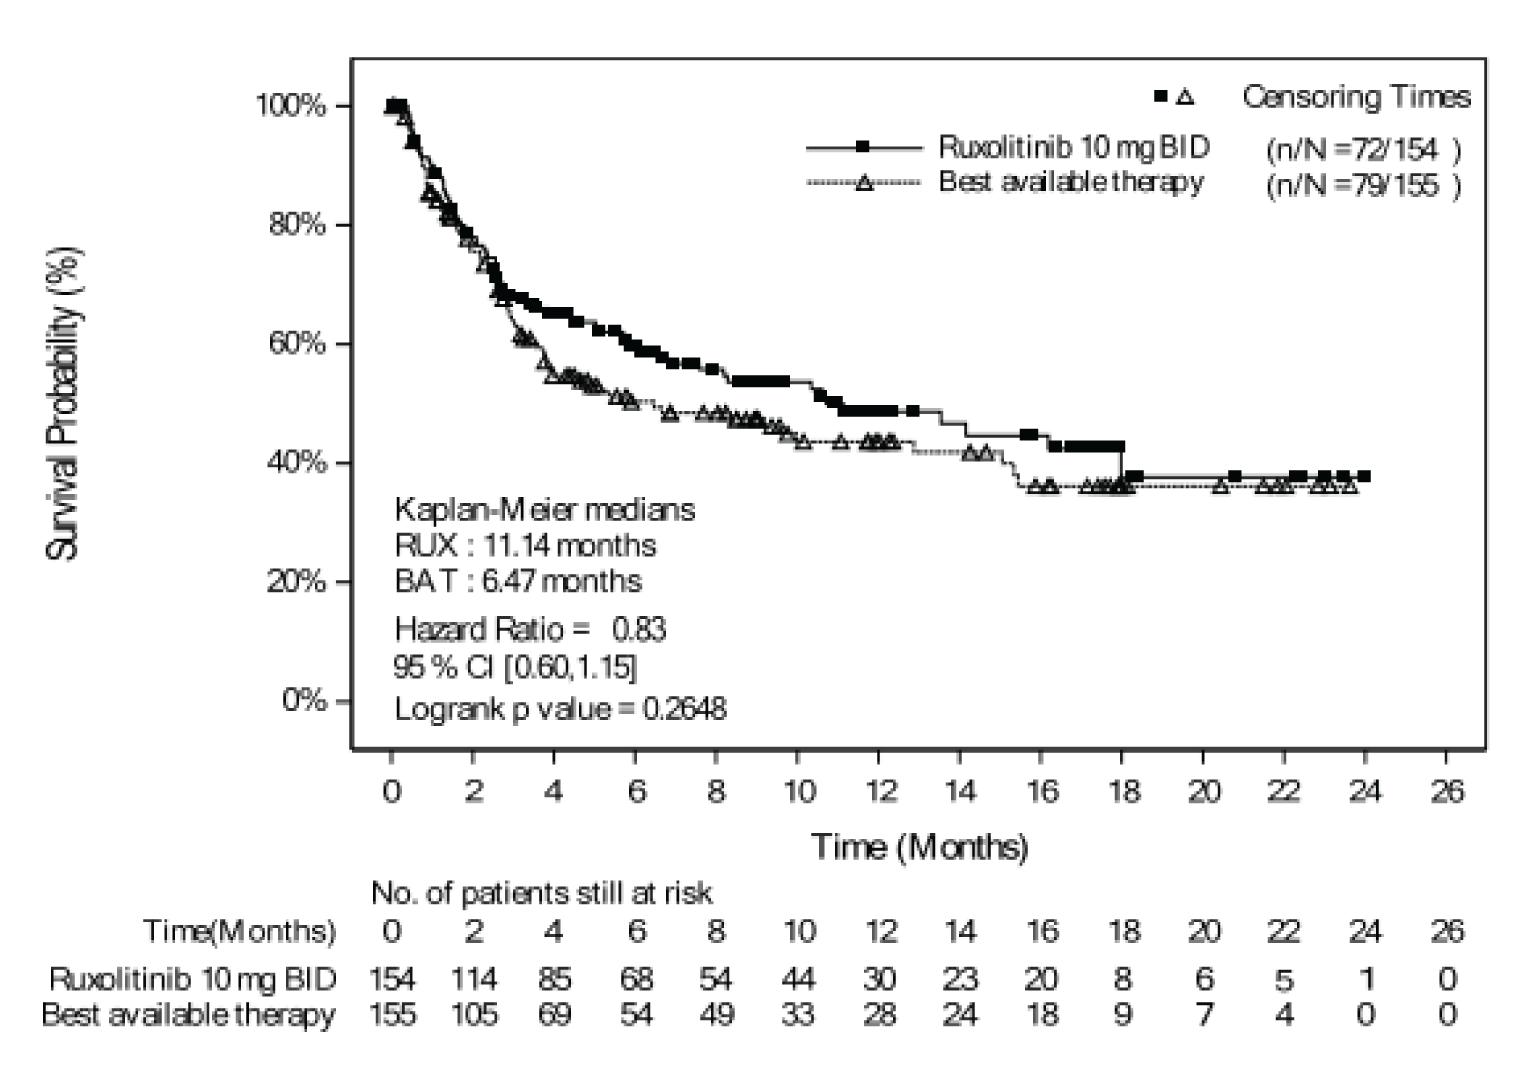 Kaplan-Meier curves shows the survival probability on the Y axis (0 to 100%) and time in months on the X axis (0 to 26). Censoring is also noted on the curves at distinct time points, where less than 10 patients remain uncensored after 18 months. The ruxolitinib and best available therapy curves show a separation at approximately 4 months and a near convergence after 14 months.